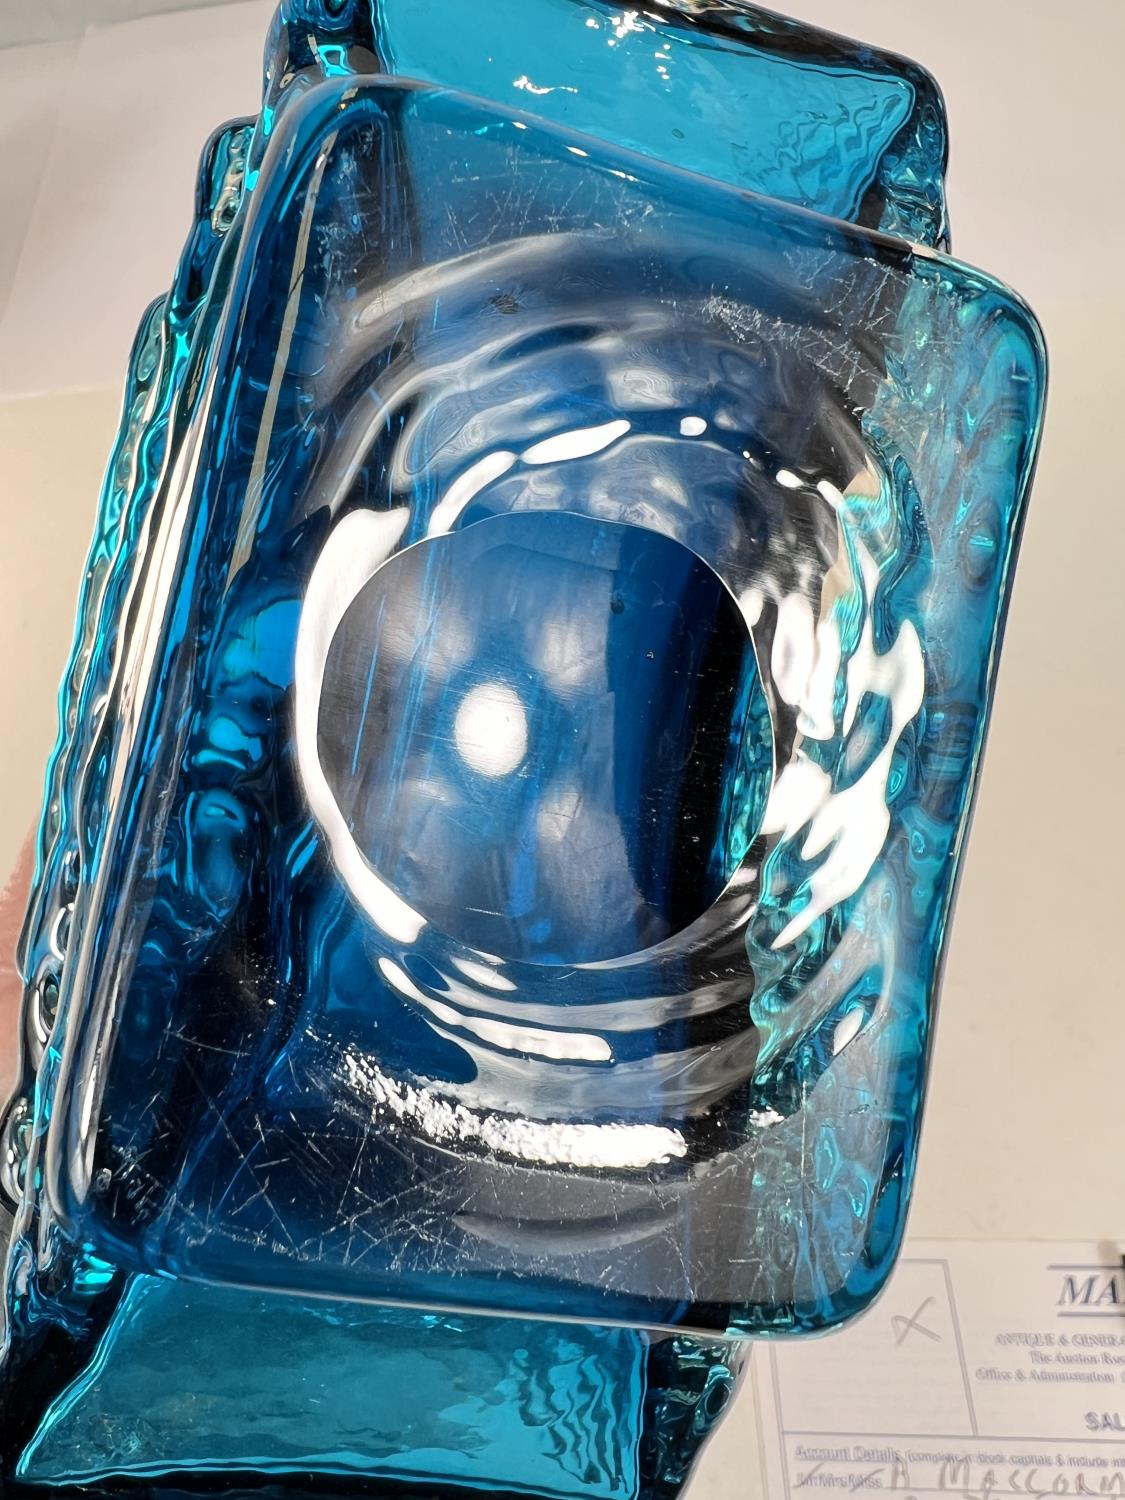 Whitefriars Geoffrey Baxter 'TV' glass vase Kingfisher blue colour pattern 9677 height 18cm - Image 3 of 3